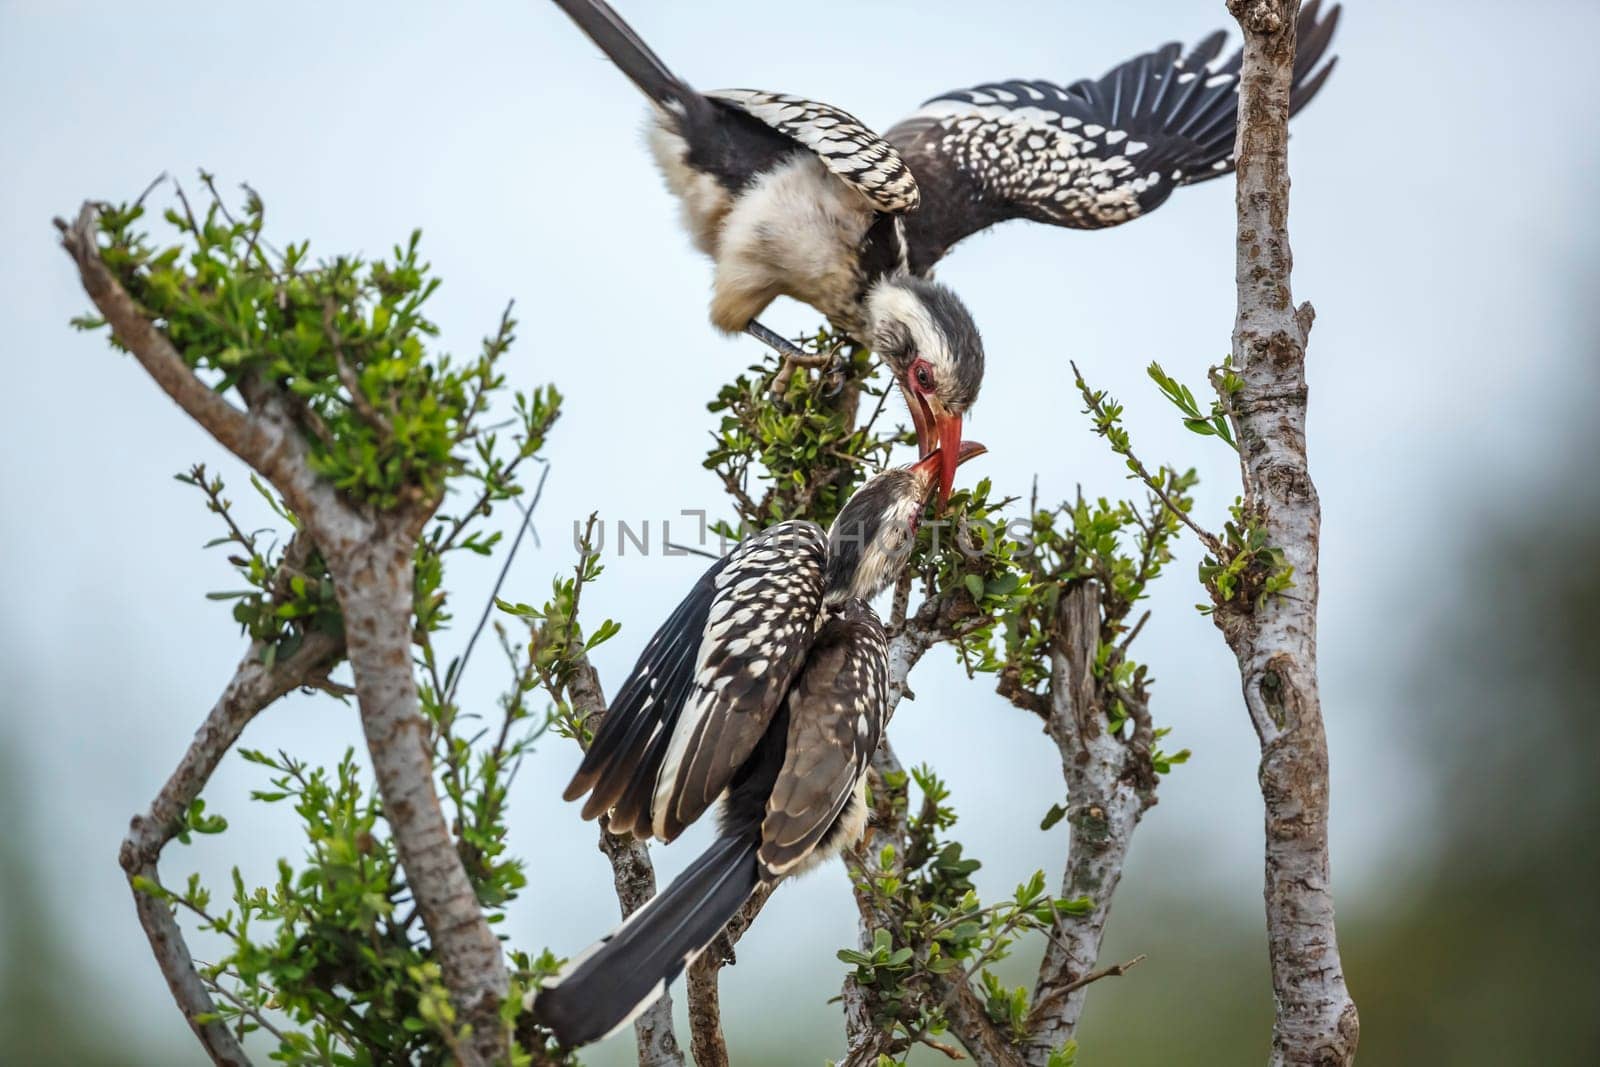 Southern red billed hornbill in Kruger national park, South Africa by PACOCOMO